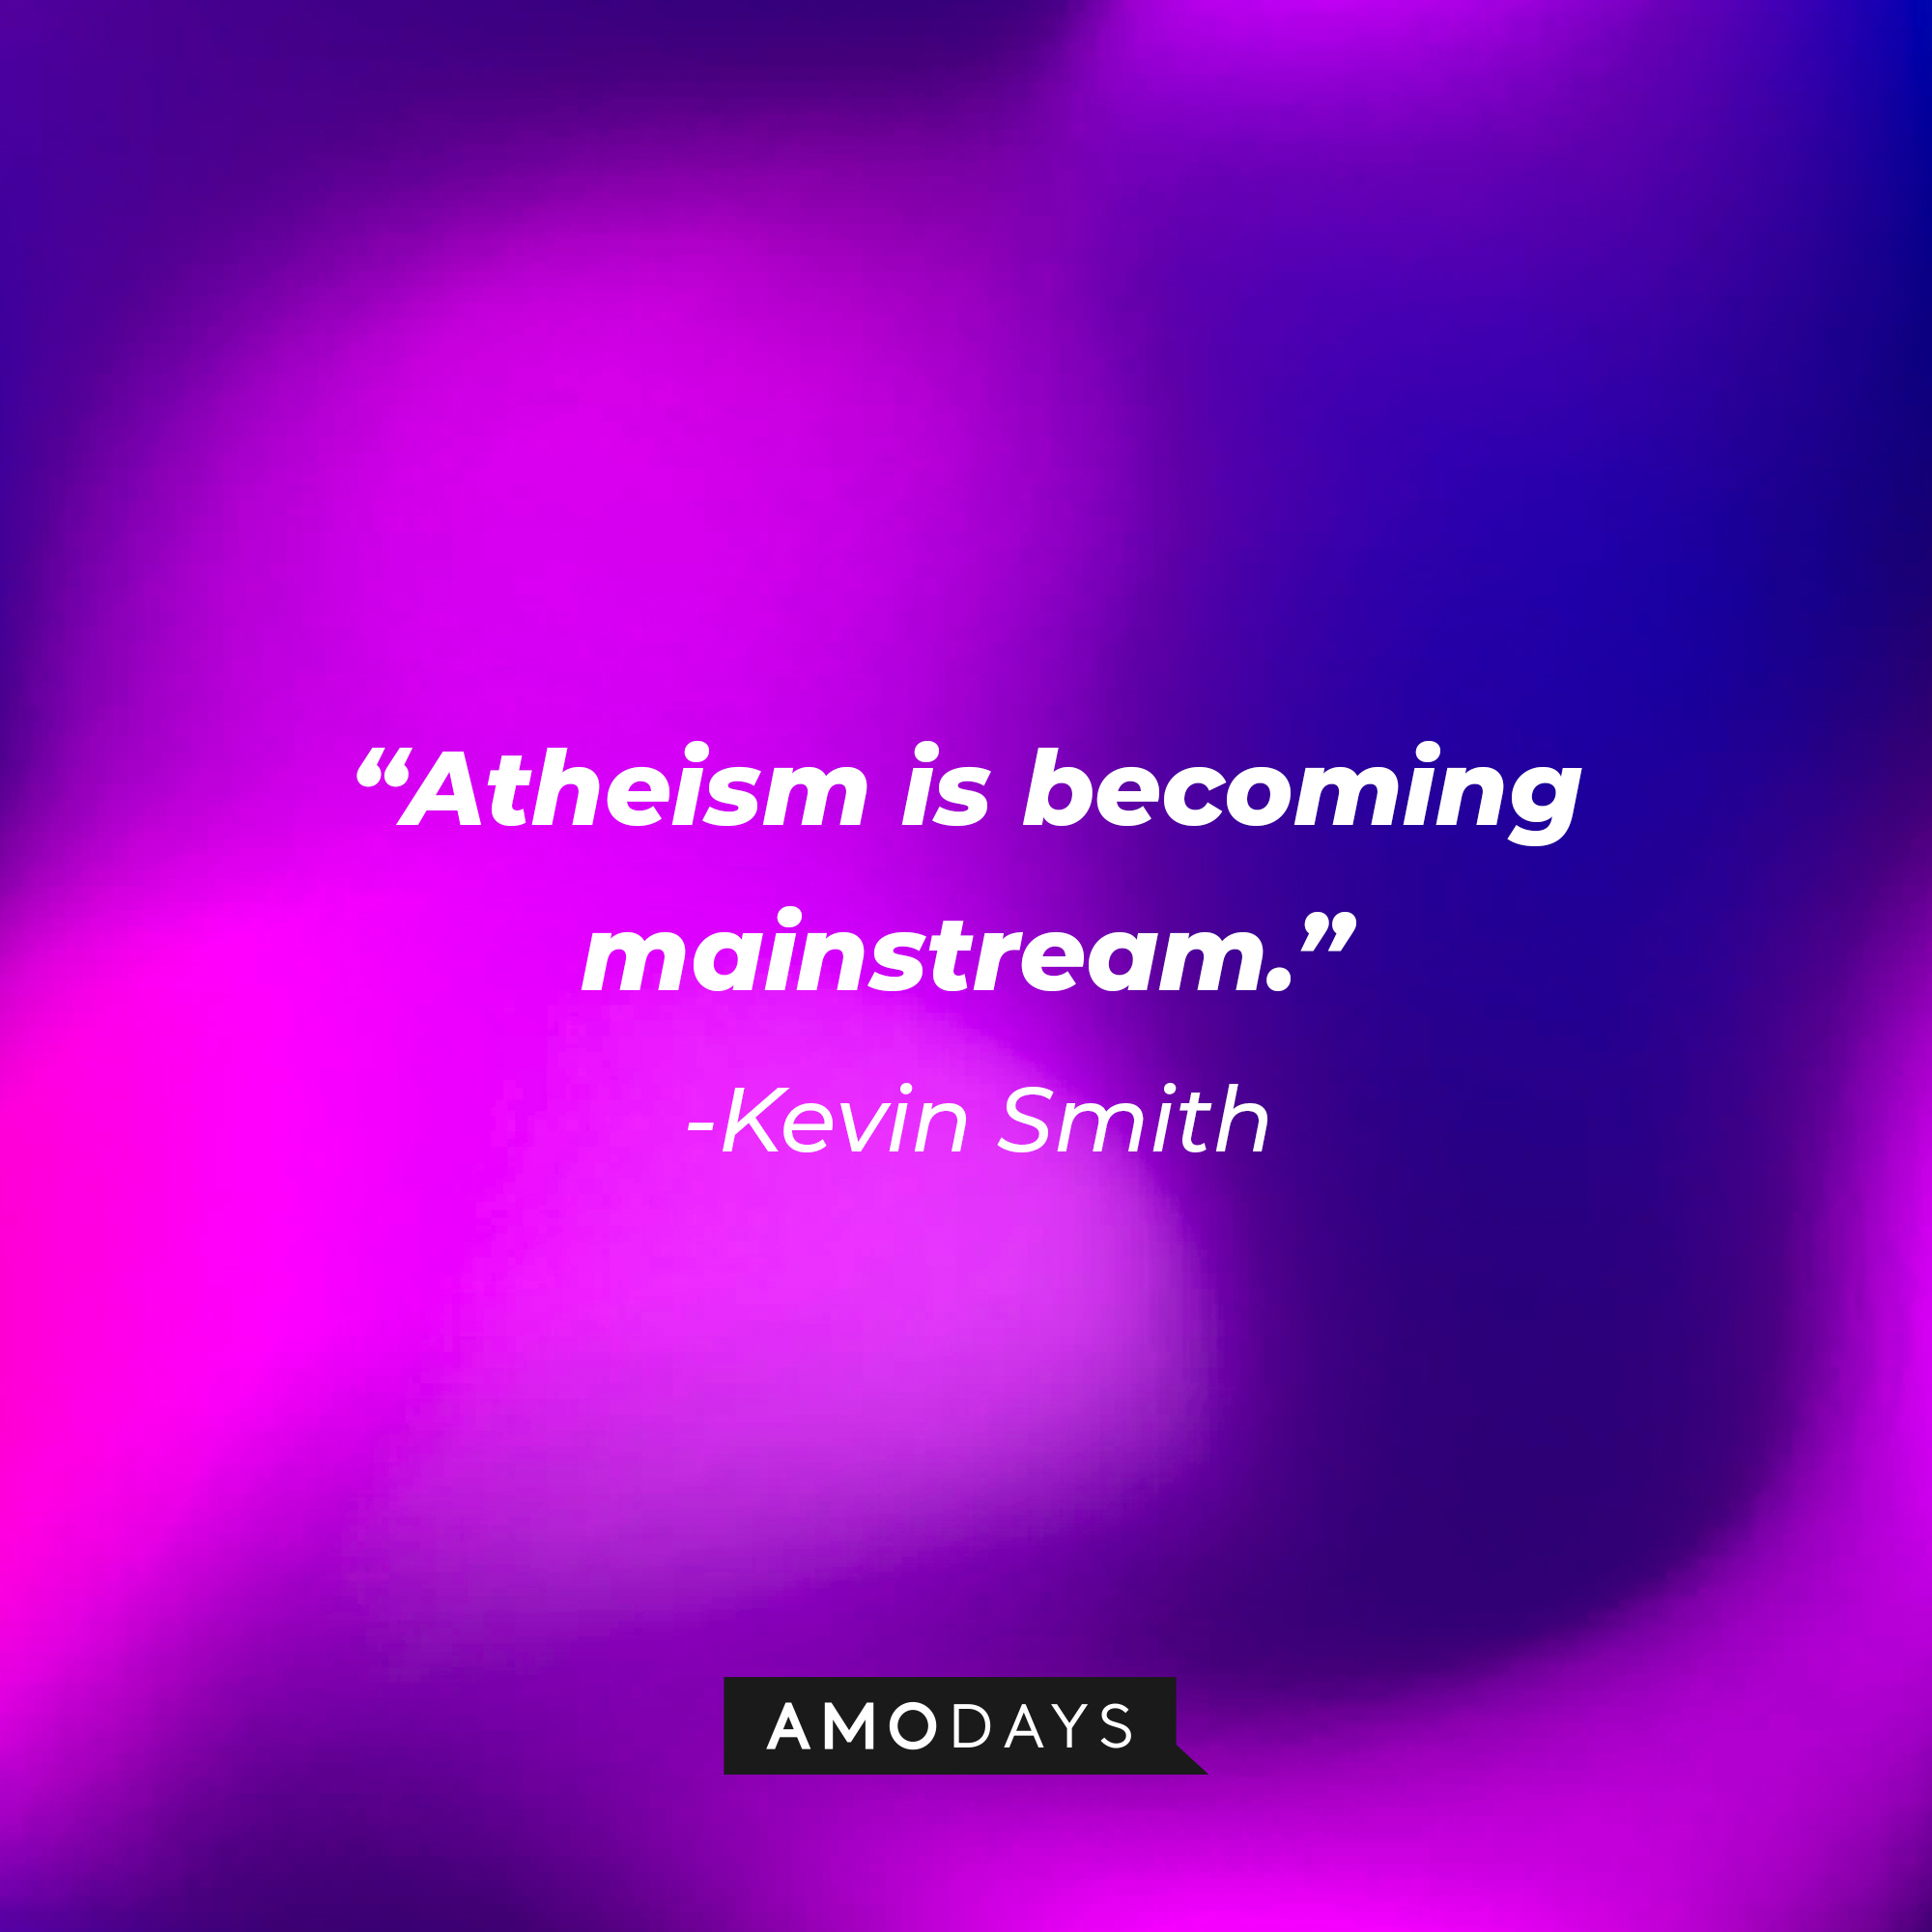 Kevin Smith’s quote: “Atheism is becoming mainstream.” | Source: AmoDays